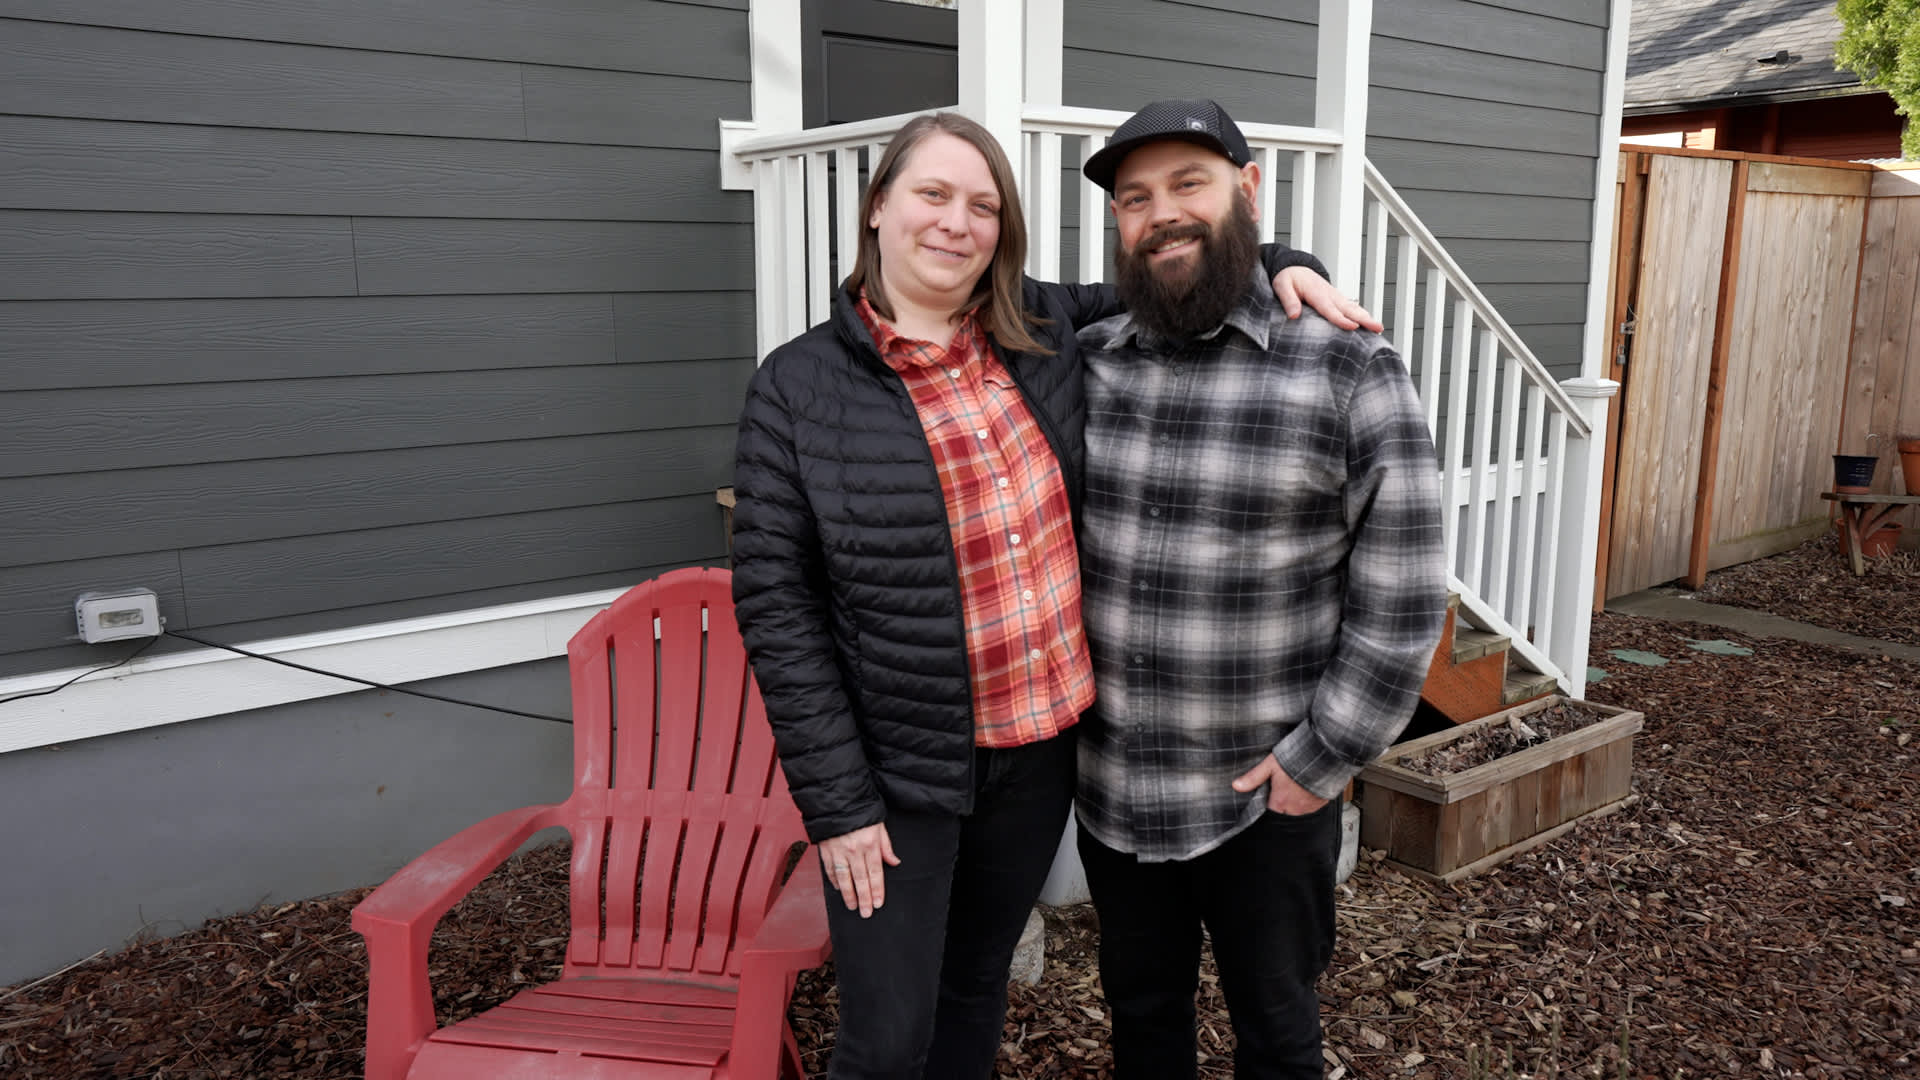 This couple spent $48,000 to convert their Portland, Oregon, home to 'net zero': 'The future is efficient and renewable'